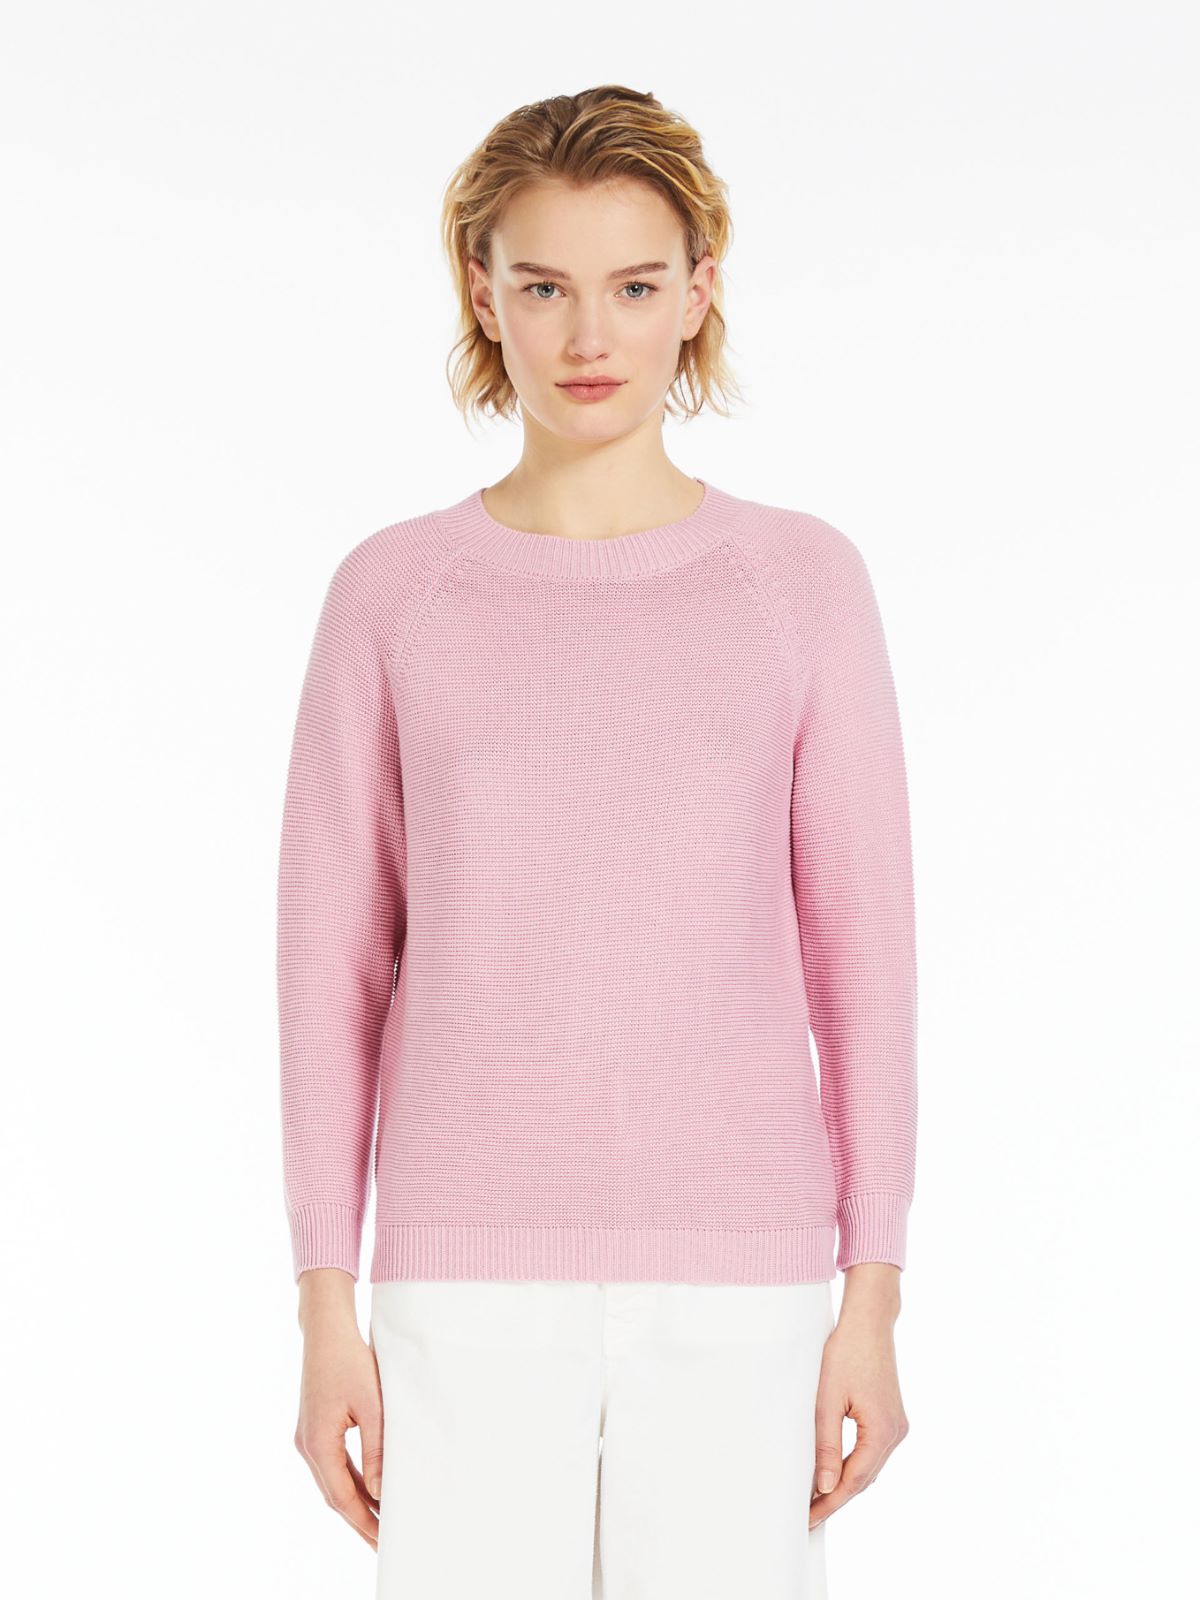 Relaxed-fit cotton sweater, pink | Weekend Max Mara